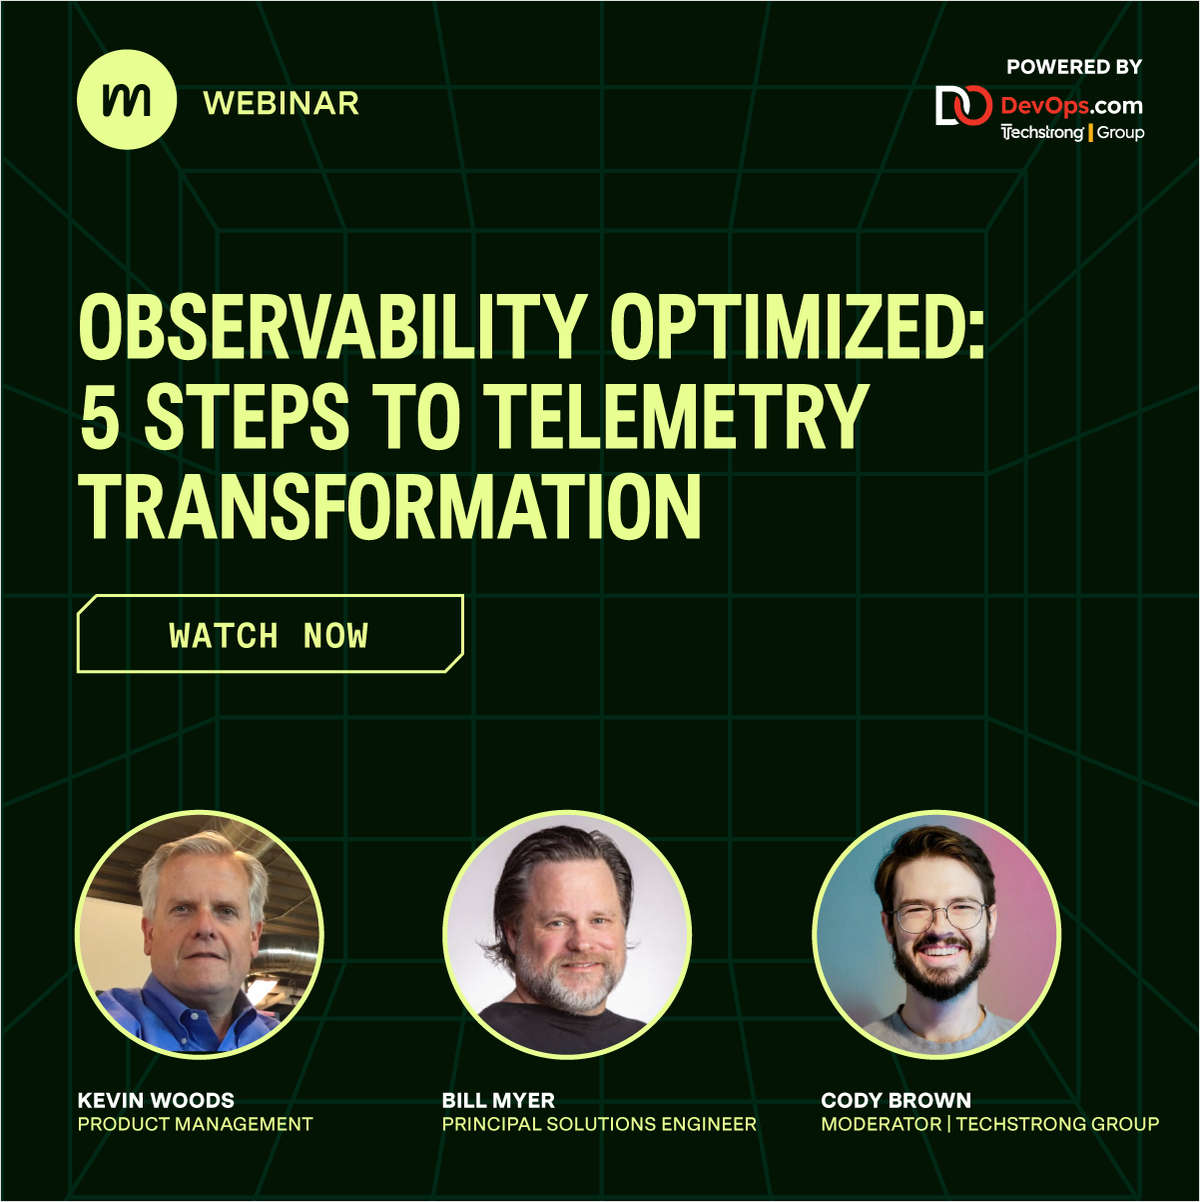 Observability Optimized: 5 Steps to Telemetry Transformation